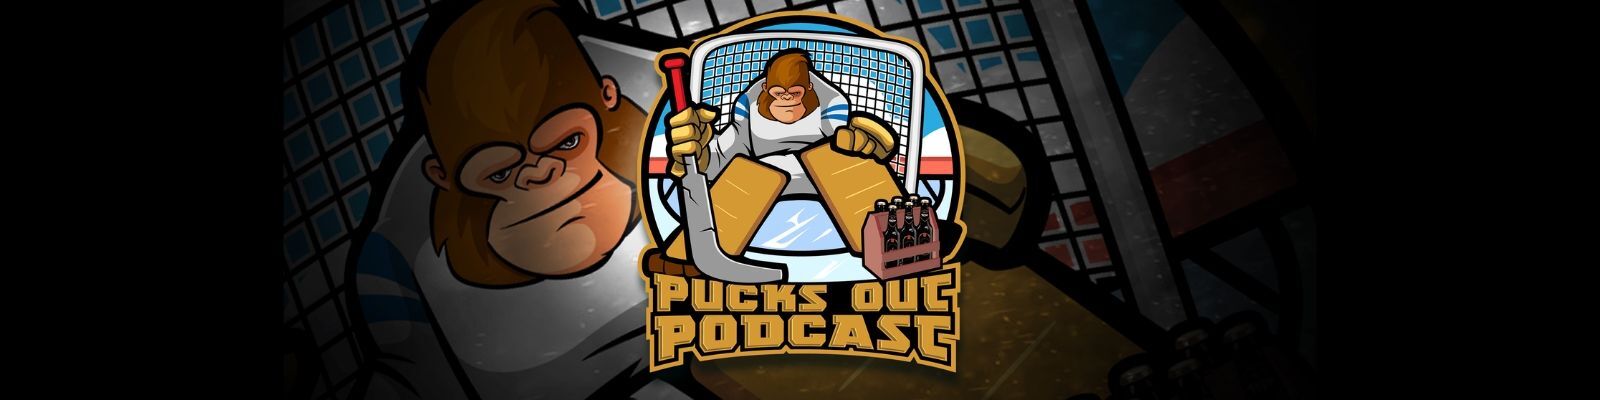 Pucks Out Podcast